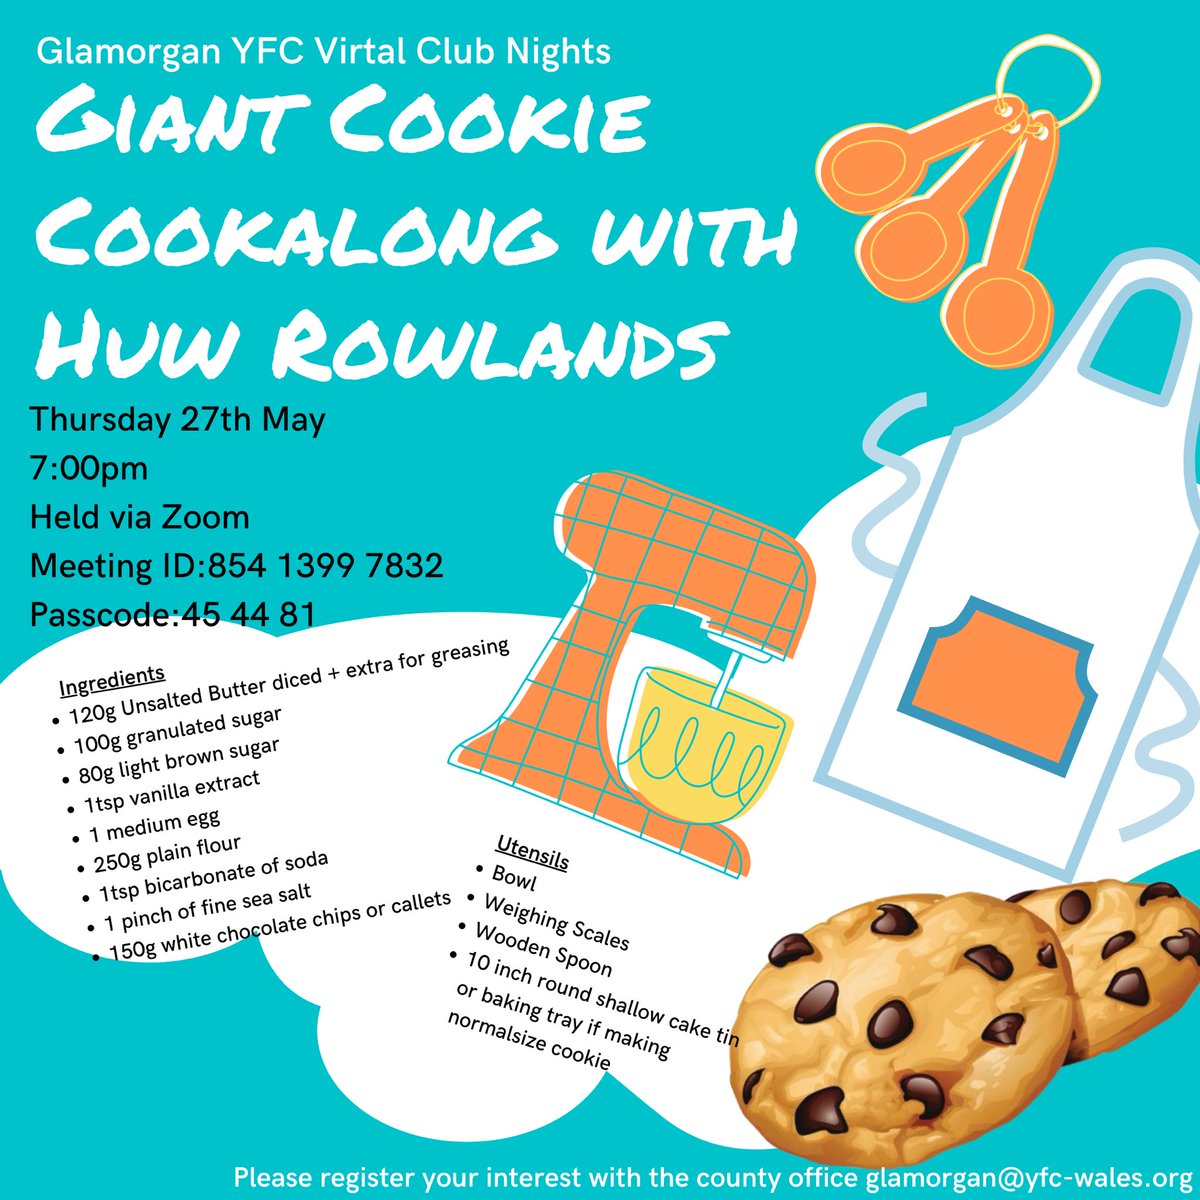 Is your mouth still watering after the last Brownie Cookalong? Well join us again this Thursday when Huw will be giving us another favourite recipe - a GIANT COOKIE! We can’t wait. Look forward to seeing you all on Thursday, 7pm sharp!